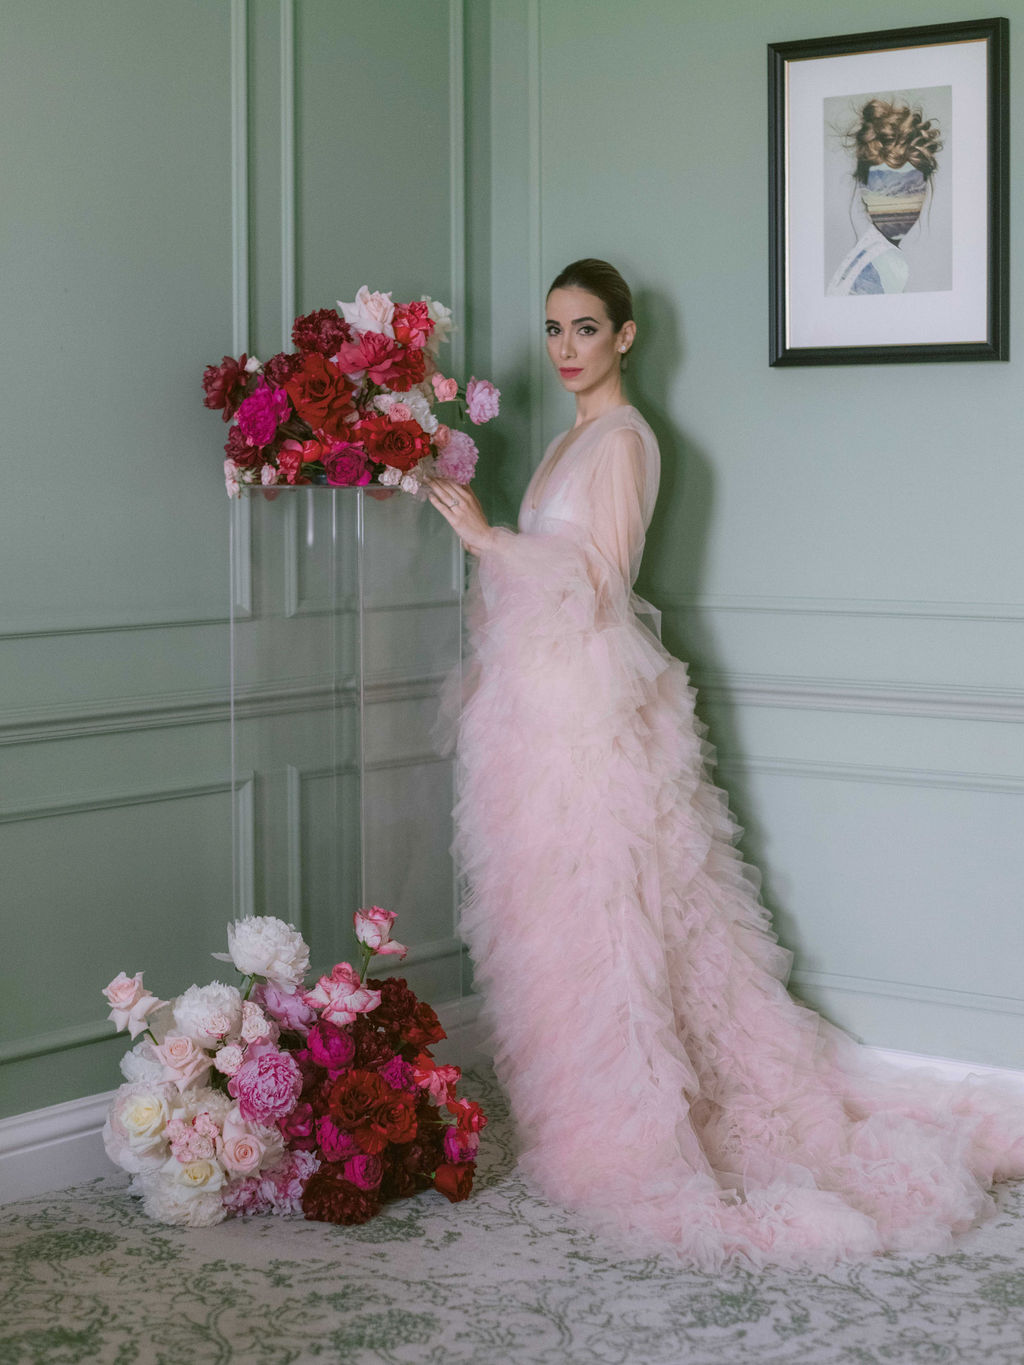 Bride in long pink bridal morning gown with flowers - Vogue wedding feature